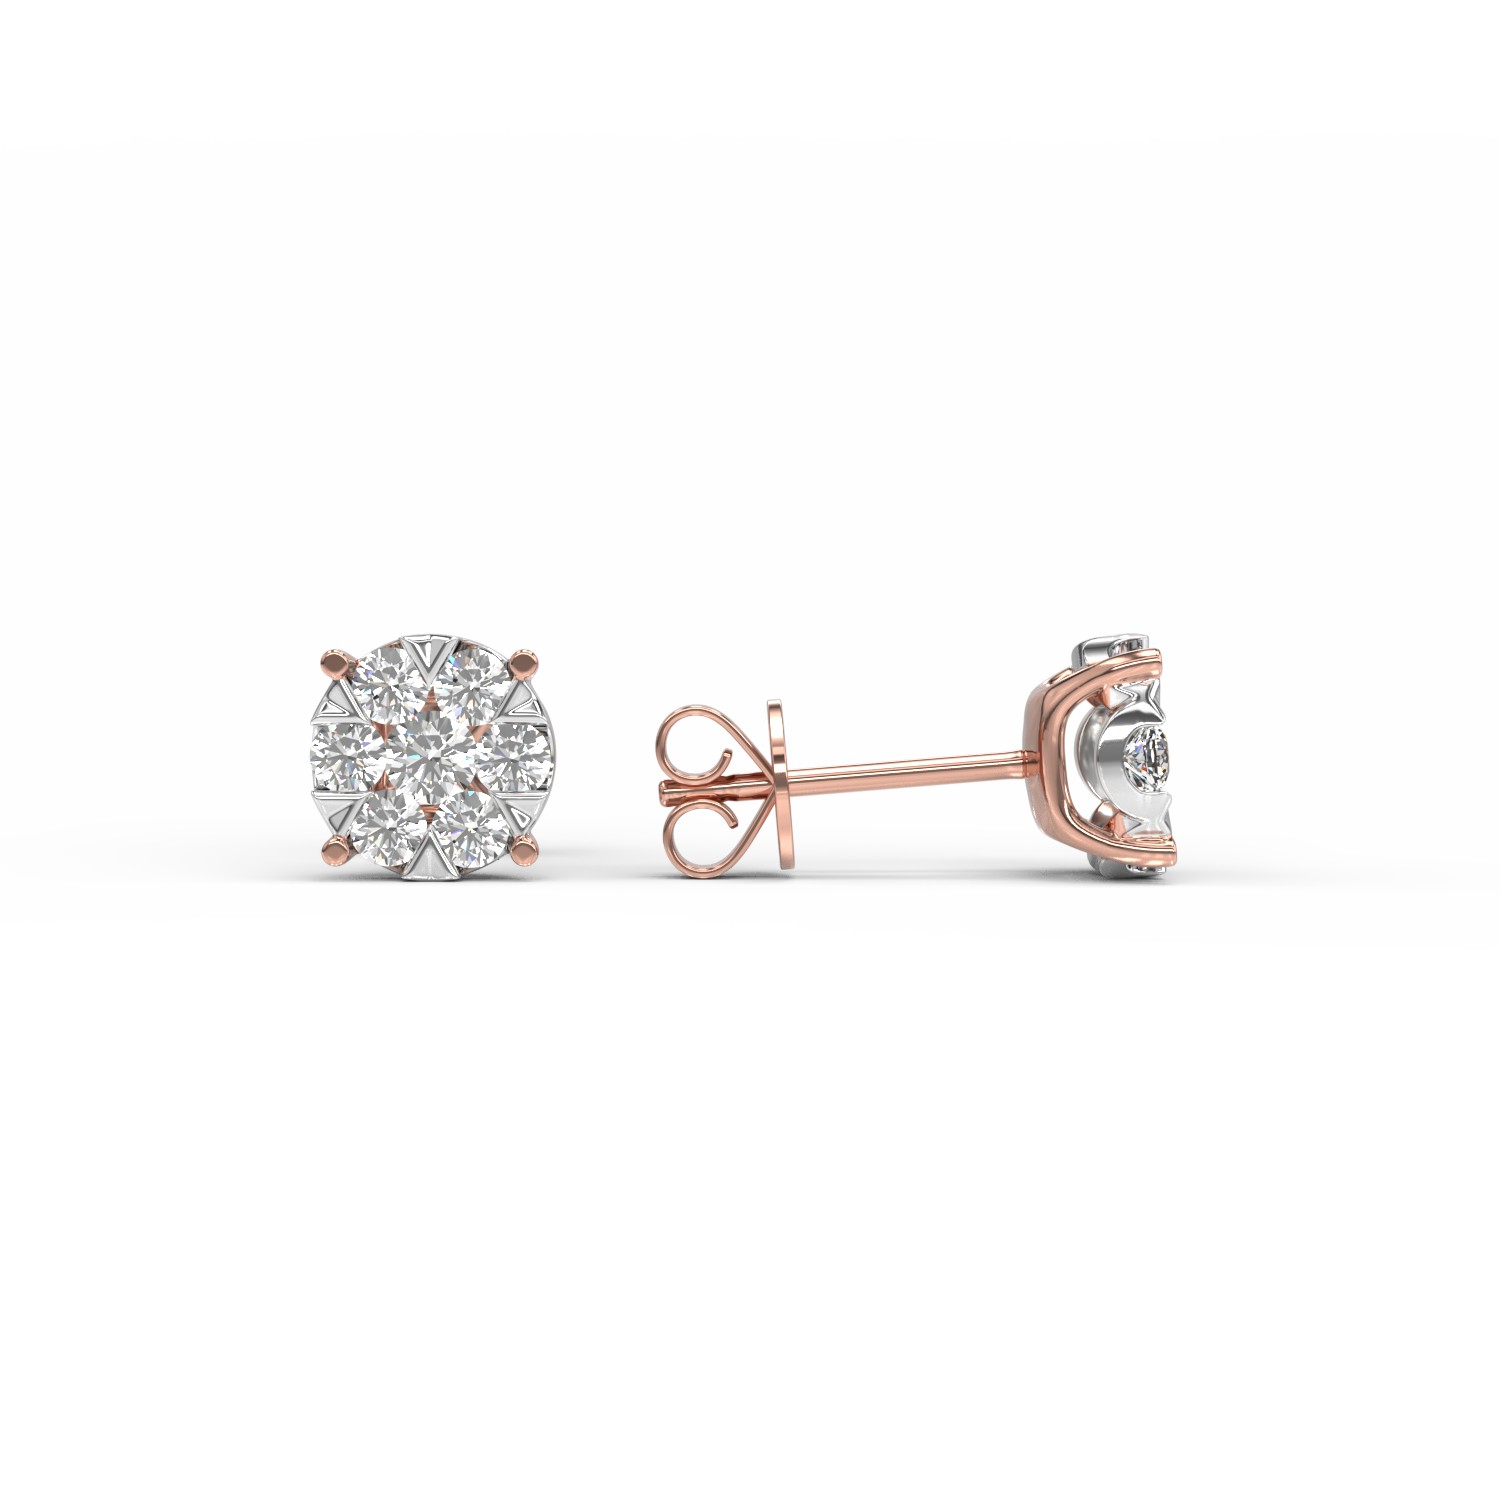 White-rose gold screw back earrings with 0.5ct diamonds